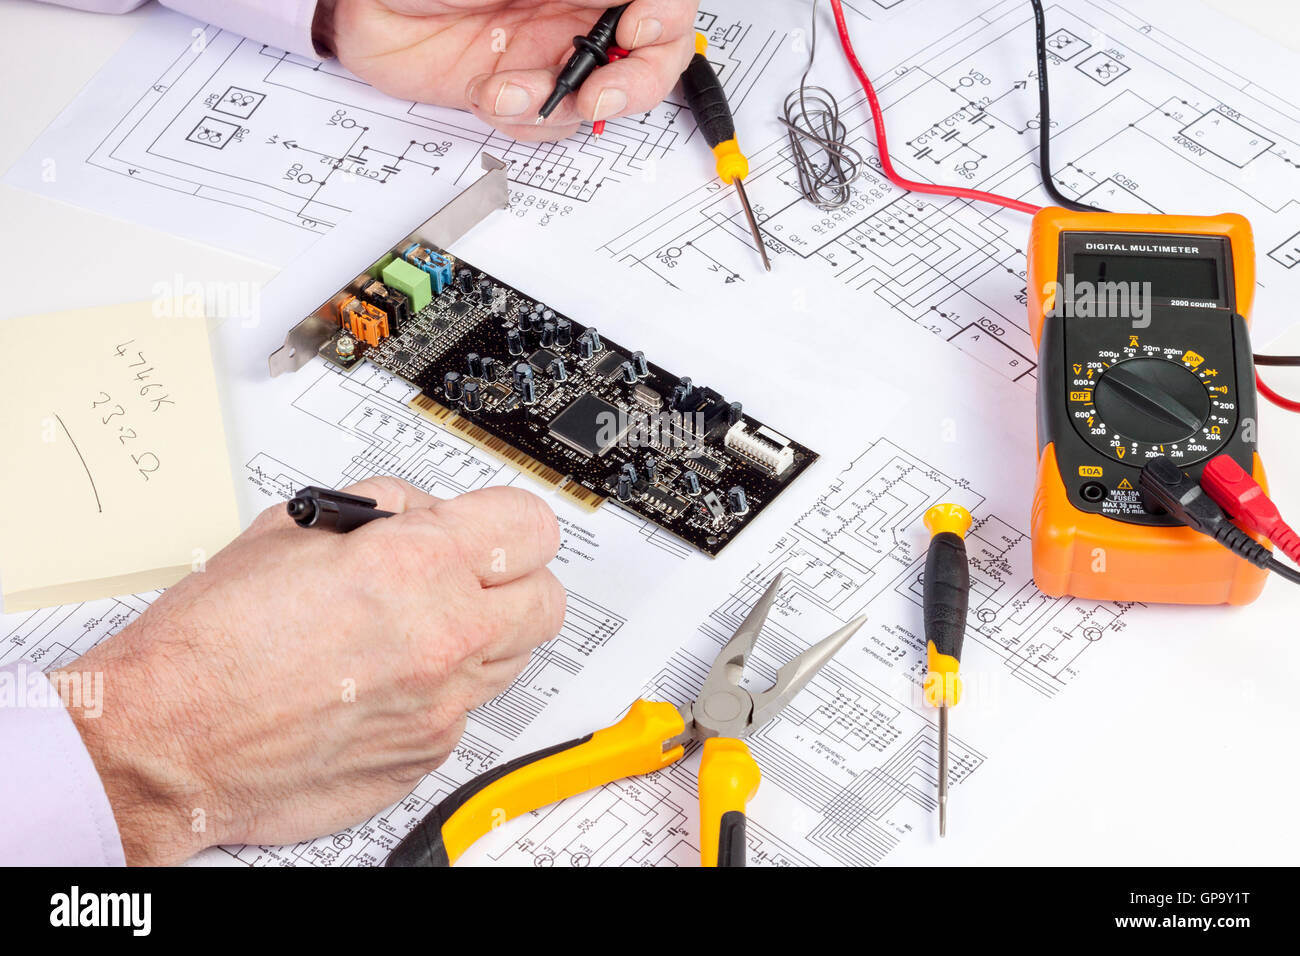 Electronics engineer making changes to a computer circuit wiring diagram Stock Photo